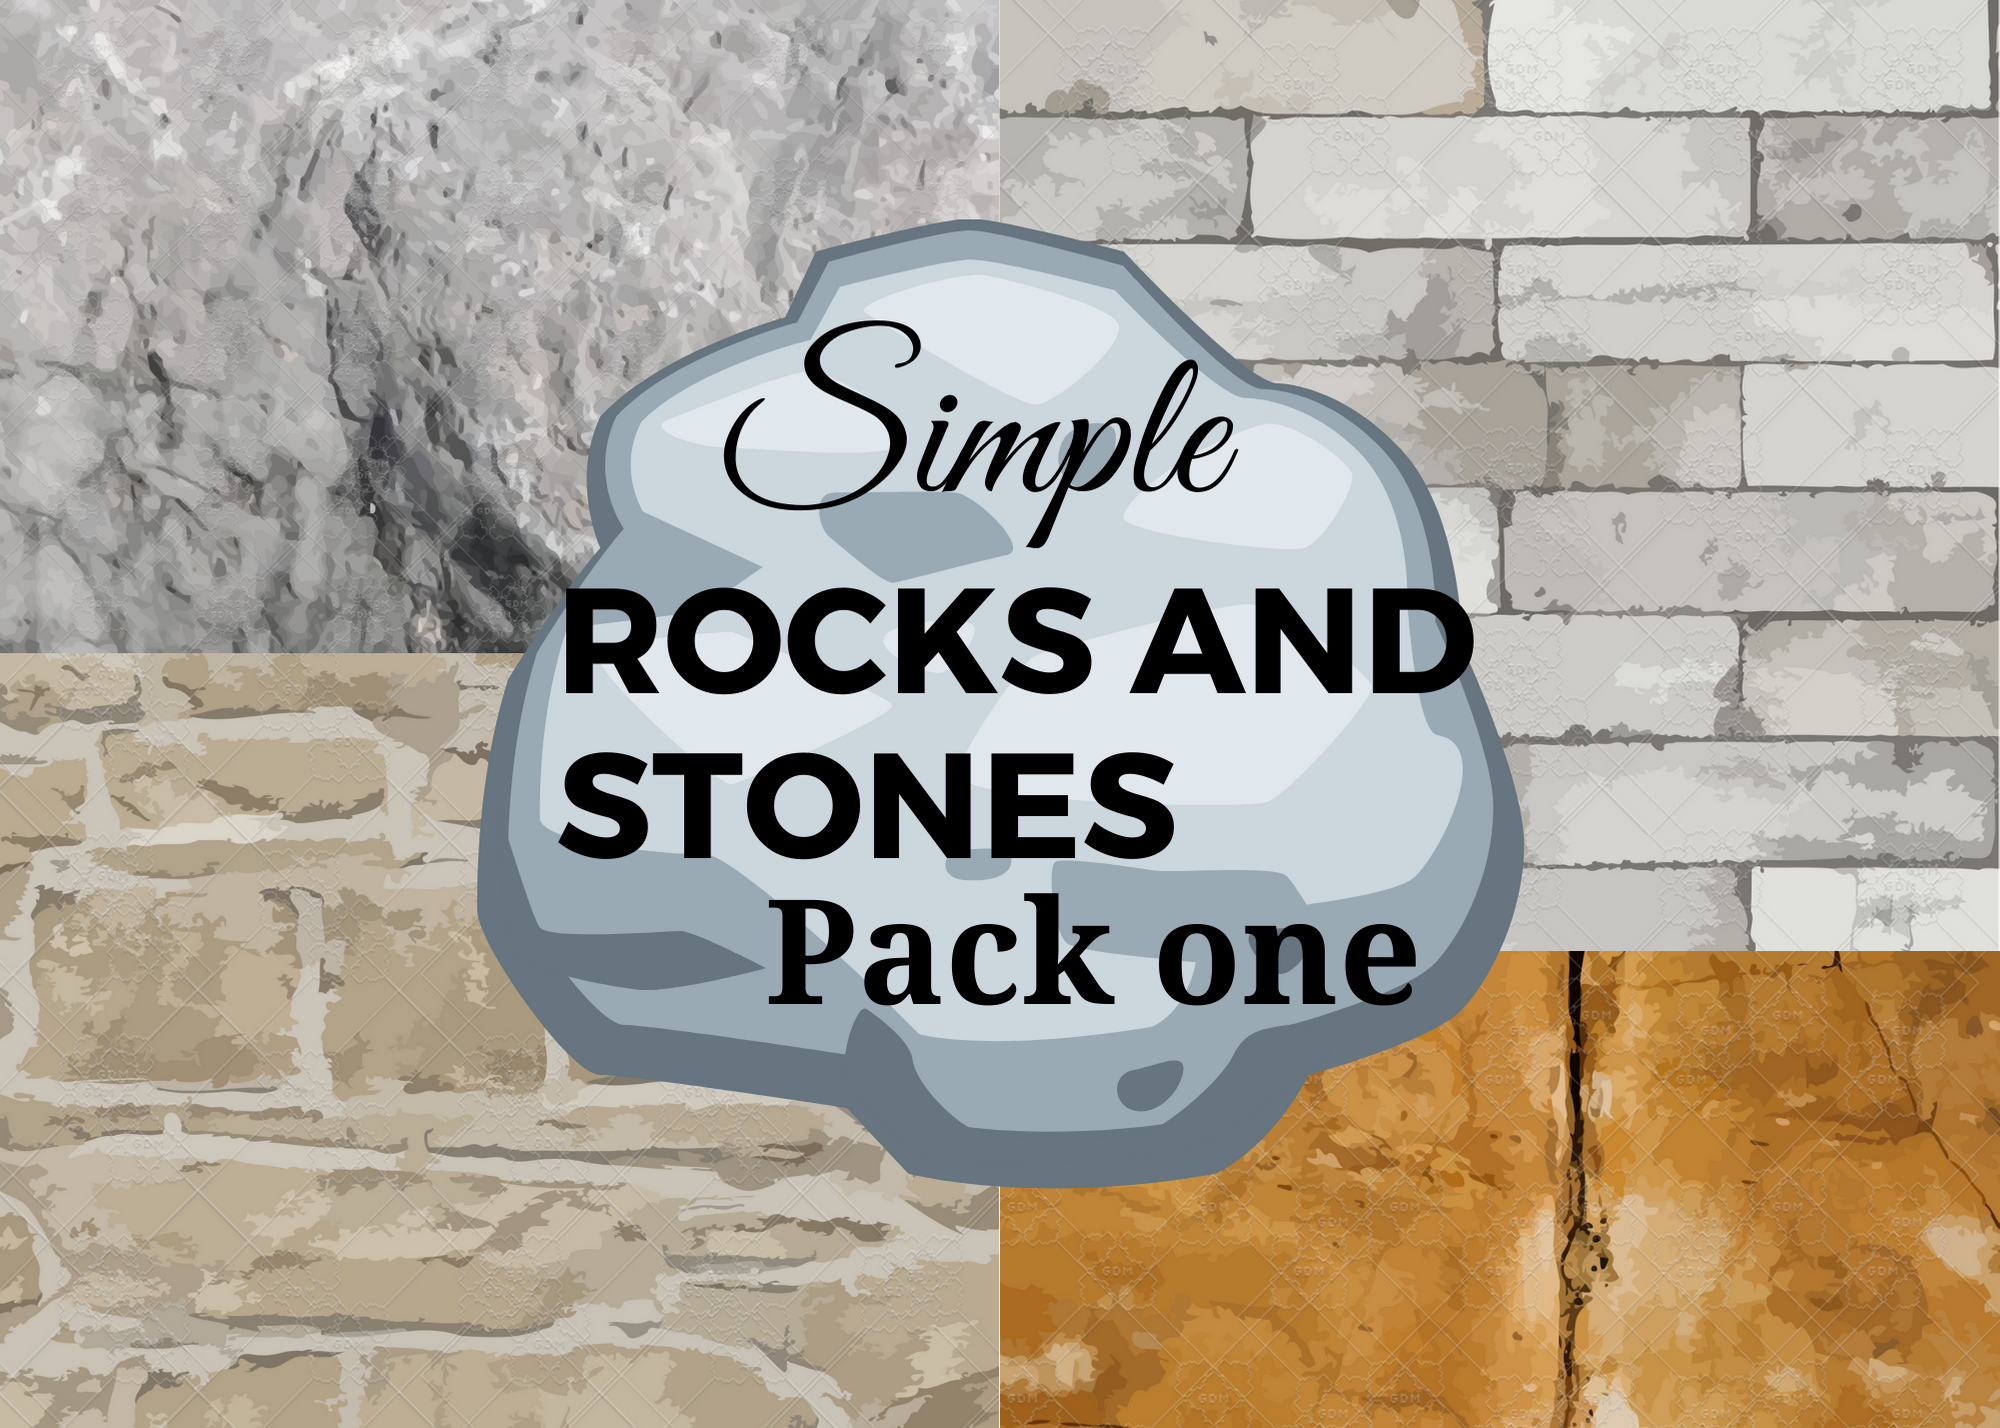 Simple Rocks and Stones Pack One